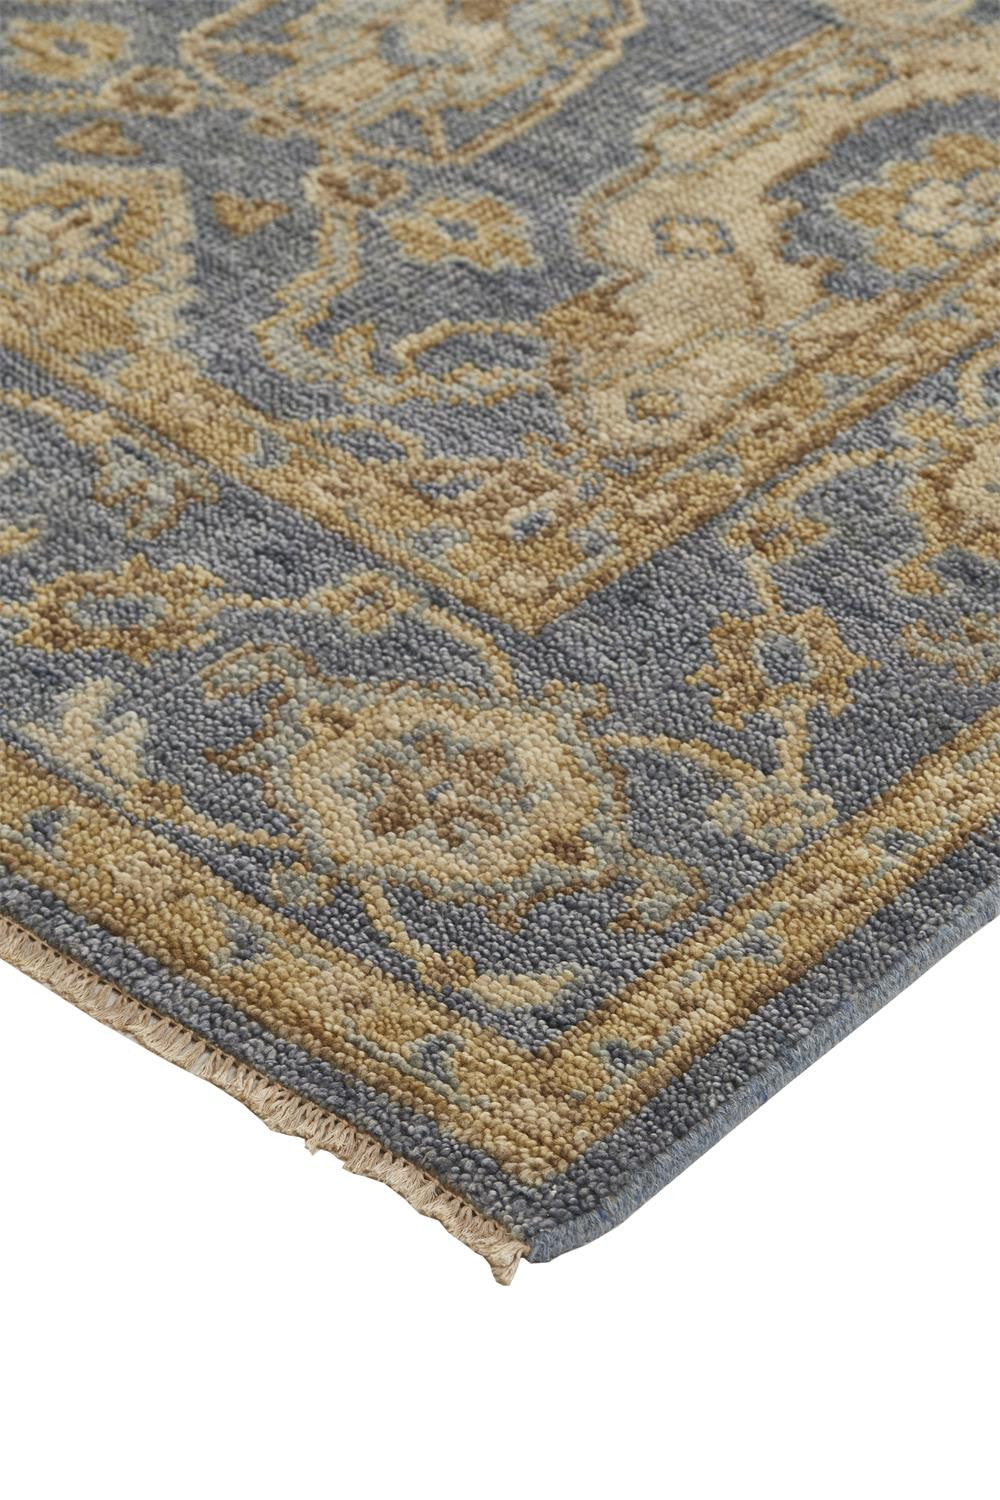 4' X 6' Blue Gold And Tan Wool Floral Hand Knotted Stain Resistant Area Rug With Fringe